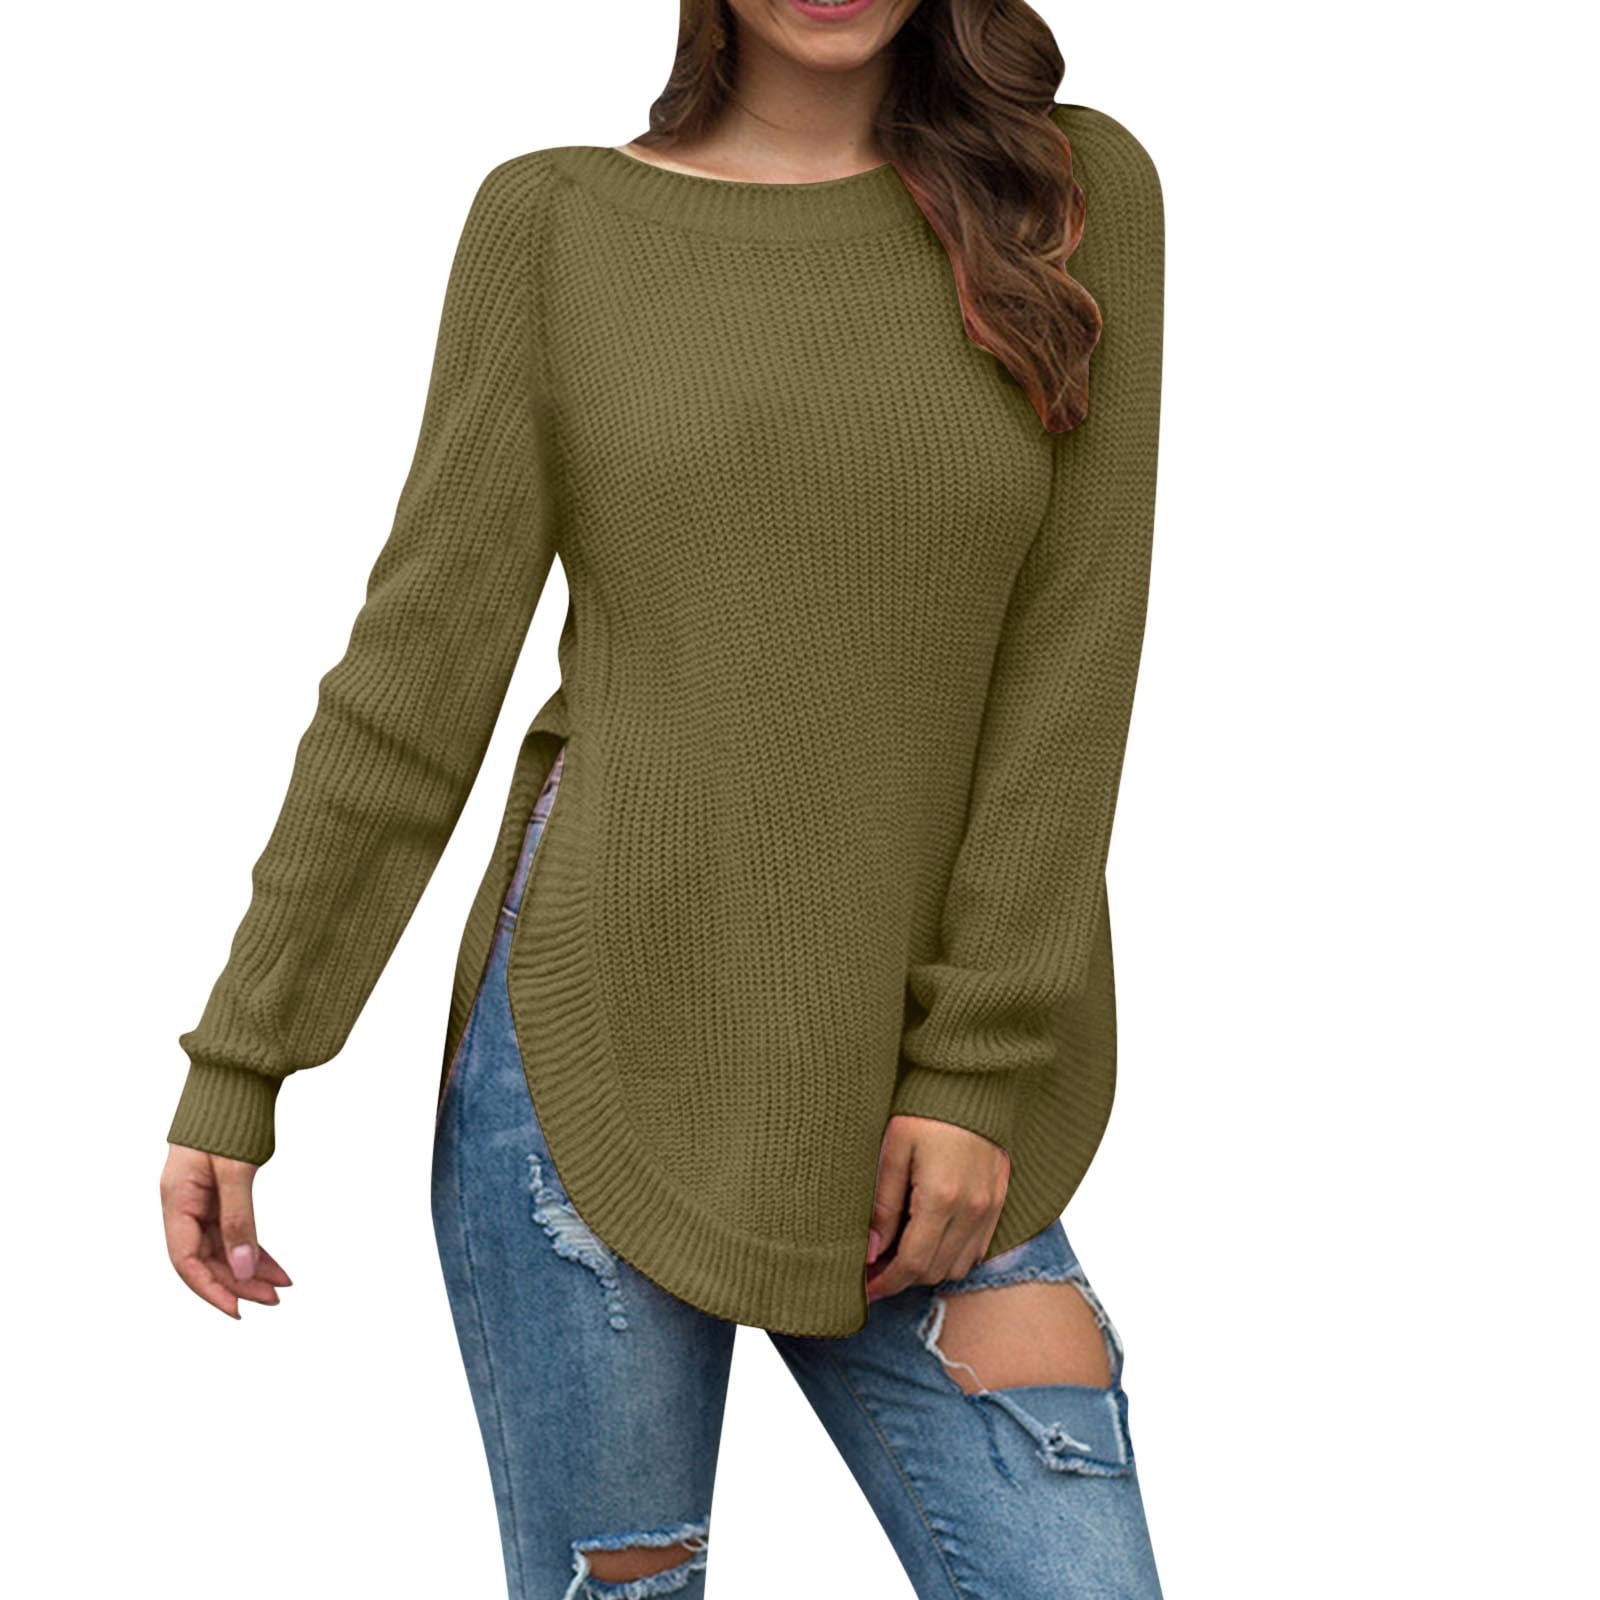  JIOEEH Sweater Coats for Women Fit Mid Long Double womens  crewneck sweatshirt girl stuff under 5 dollars bulk tshirts for printing  wholesale clearance maternity clothes $1 stuff deal of the Black 